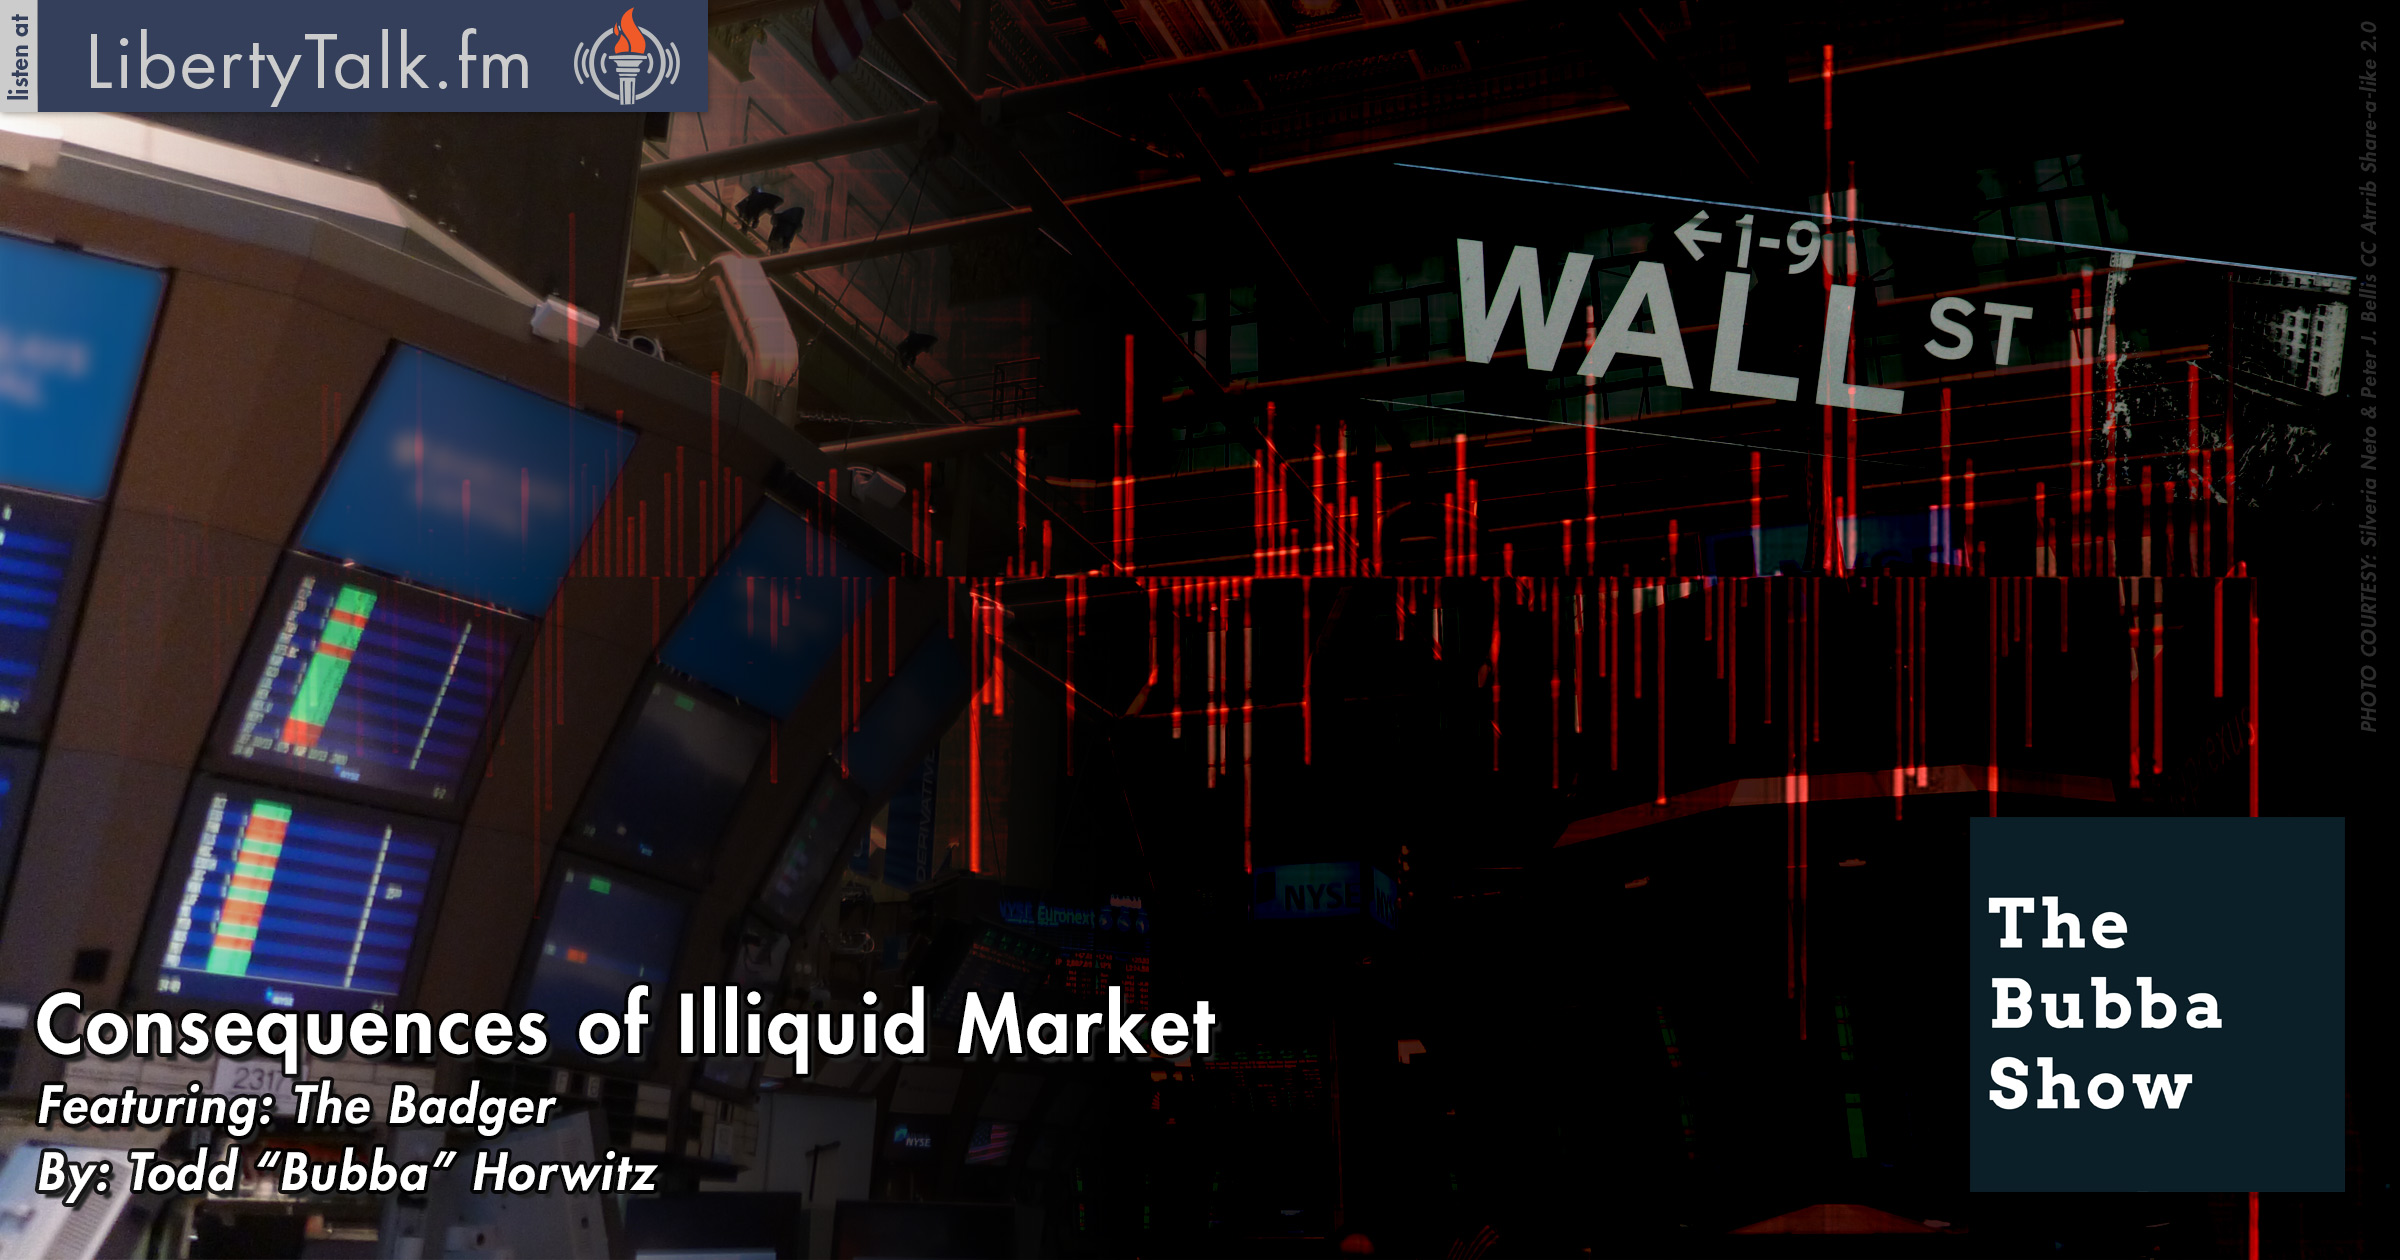 Consequences of an Illiquid Market FEATURED